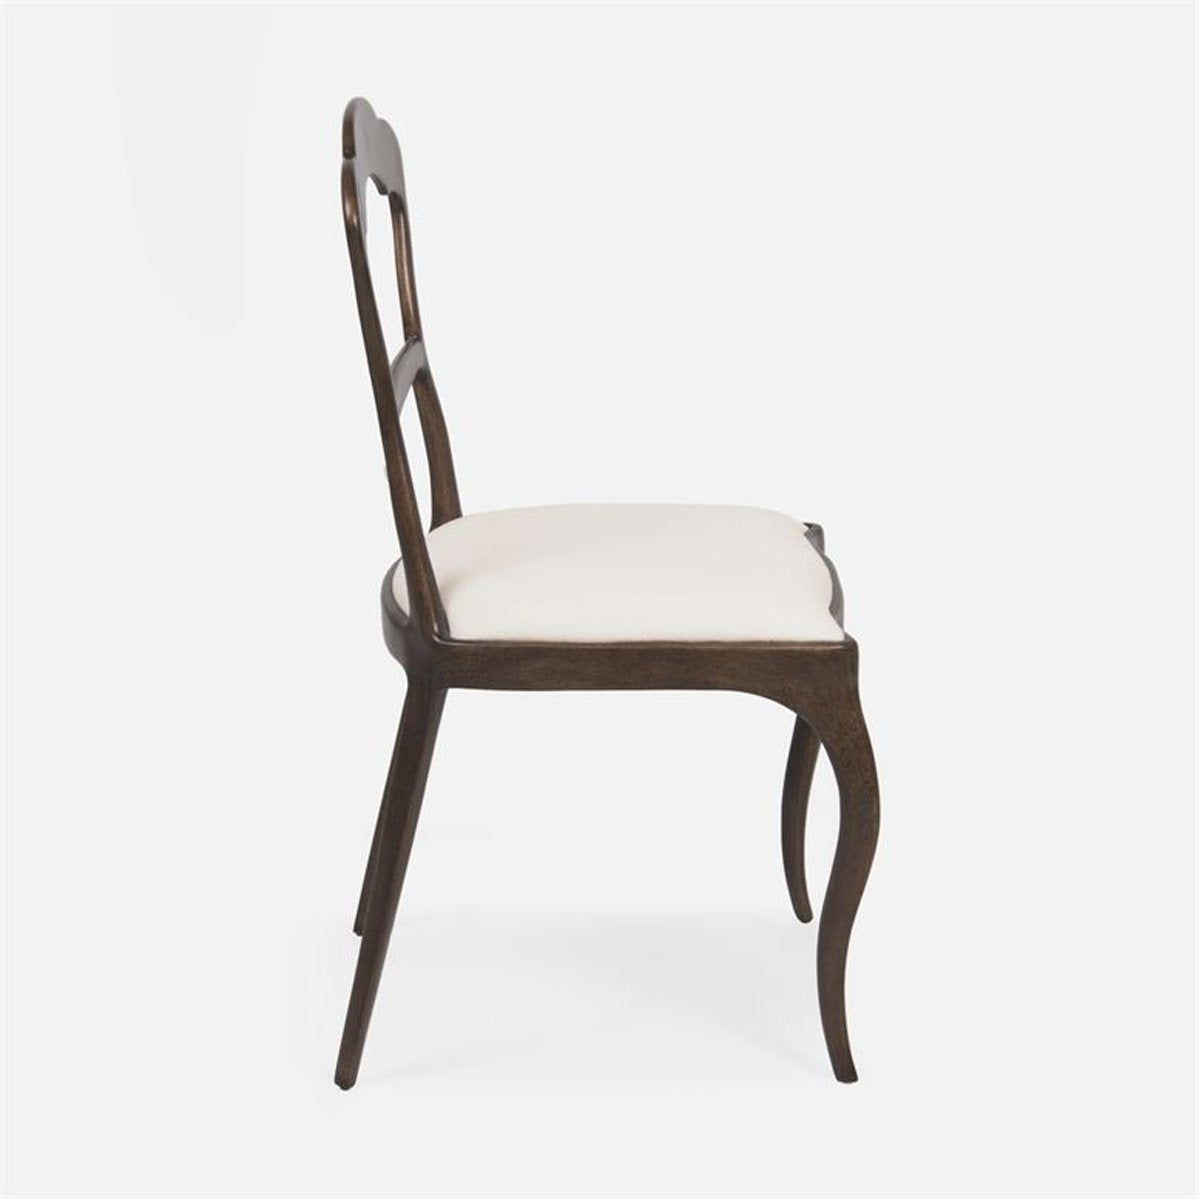 Made Goods Ithaca Rustic Bronze Outdoor Dining Chair in Weser Fabric